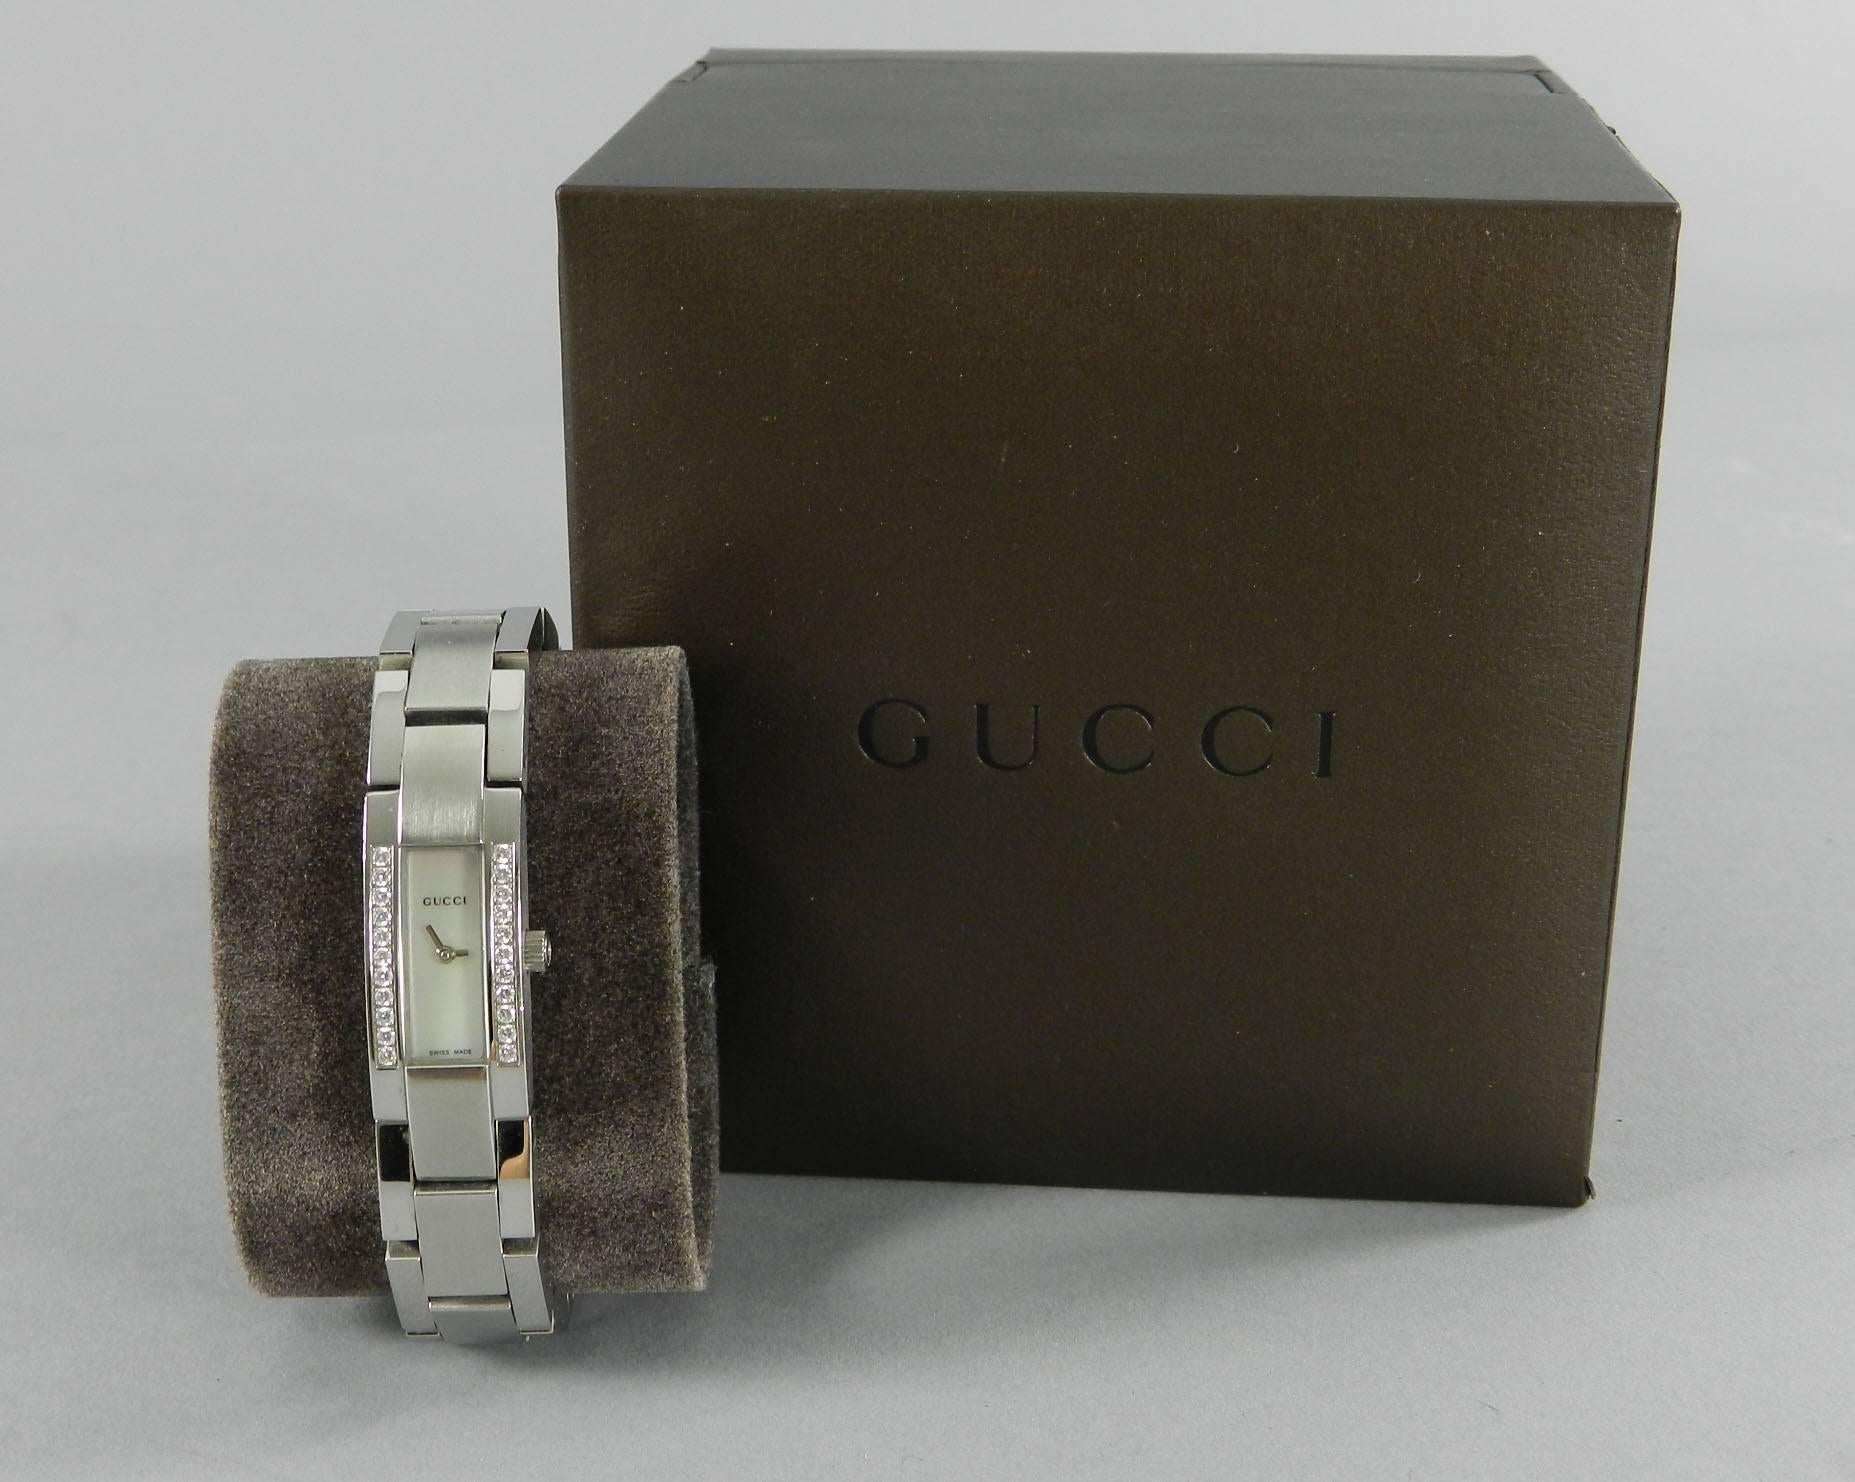 Gucci ladies stainless steel watch with mother of pearl face and diamonds. Model 4600L. Original retail $2290+. Pre-owned. Front face measures 5/8